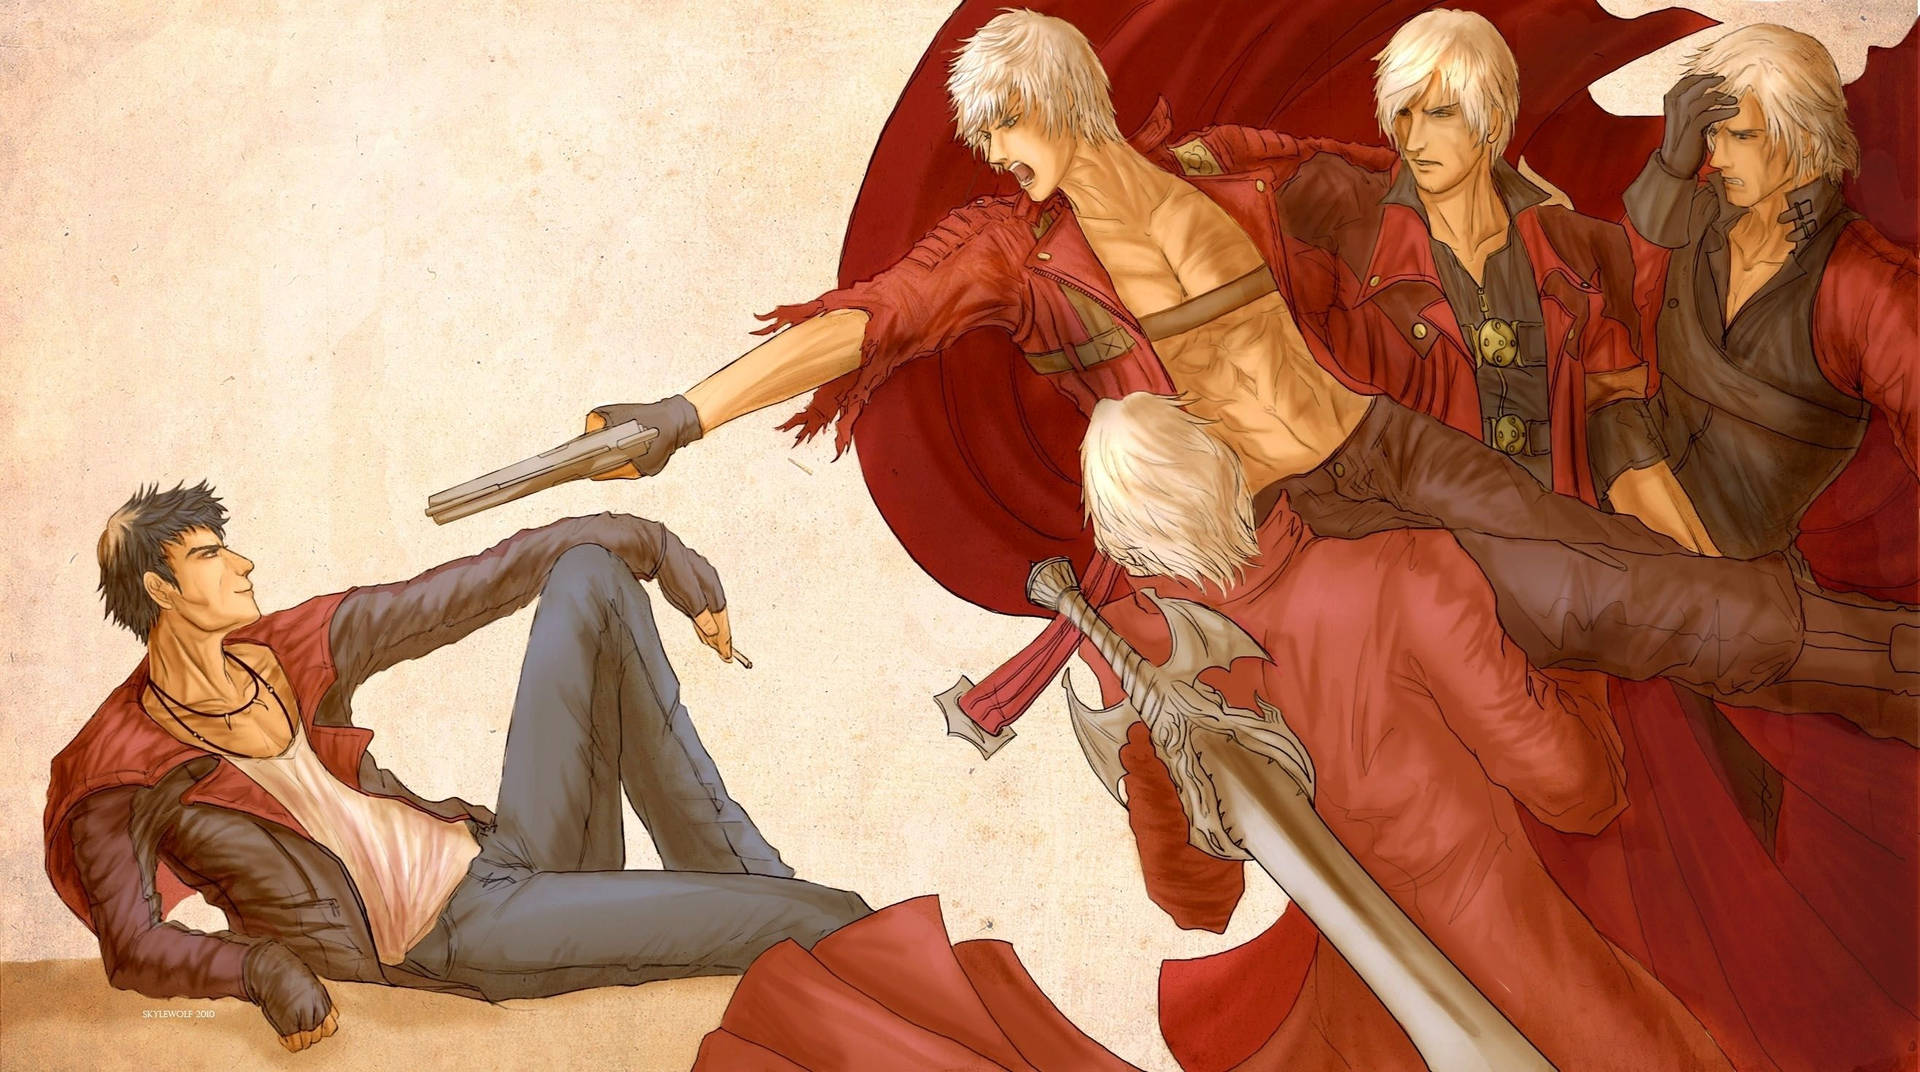 Dante putting his devilish strength and skill to the test Wallpaper